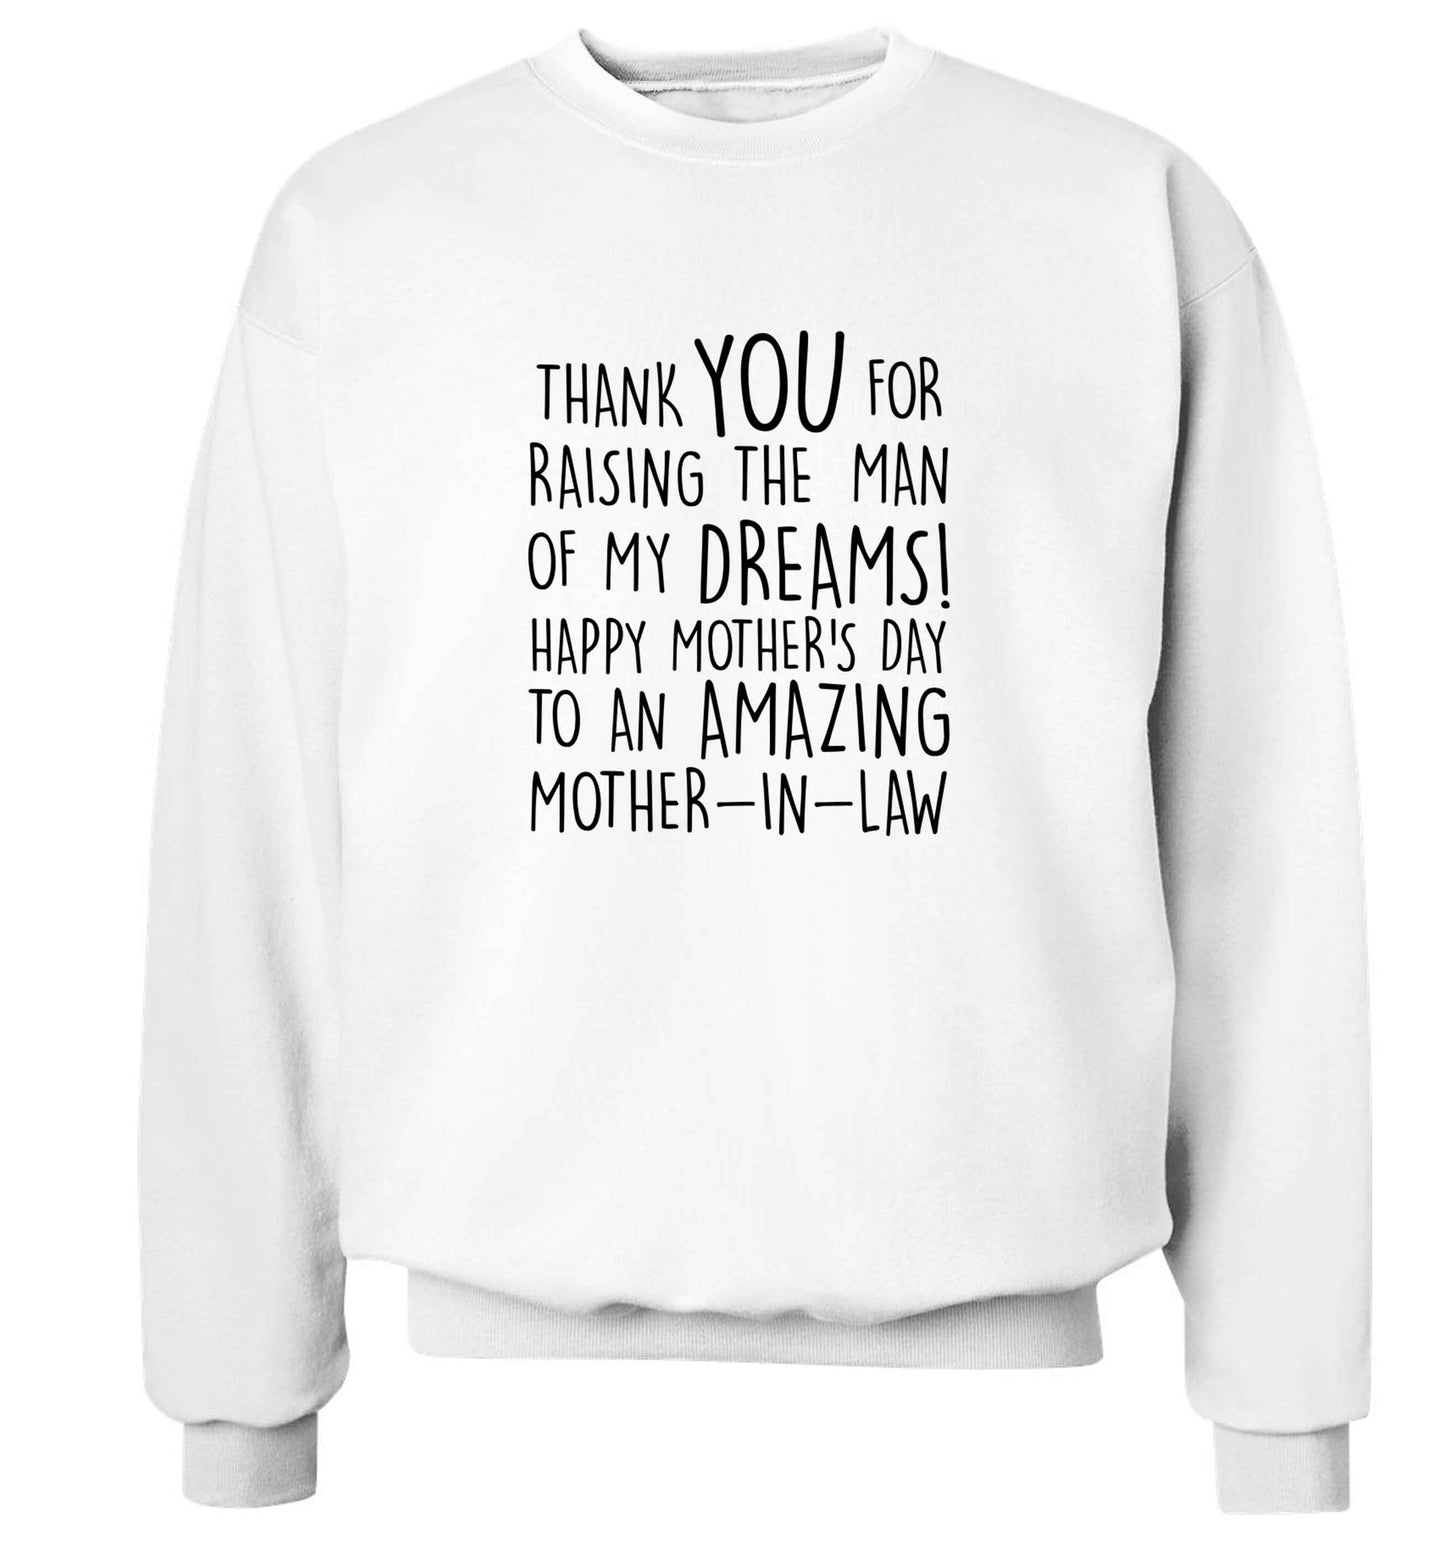 Raising the man of my dreams mother's day mother-in-law adult's unisex white sweater 2XL